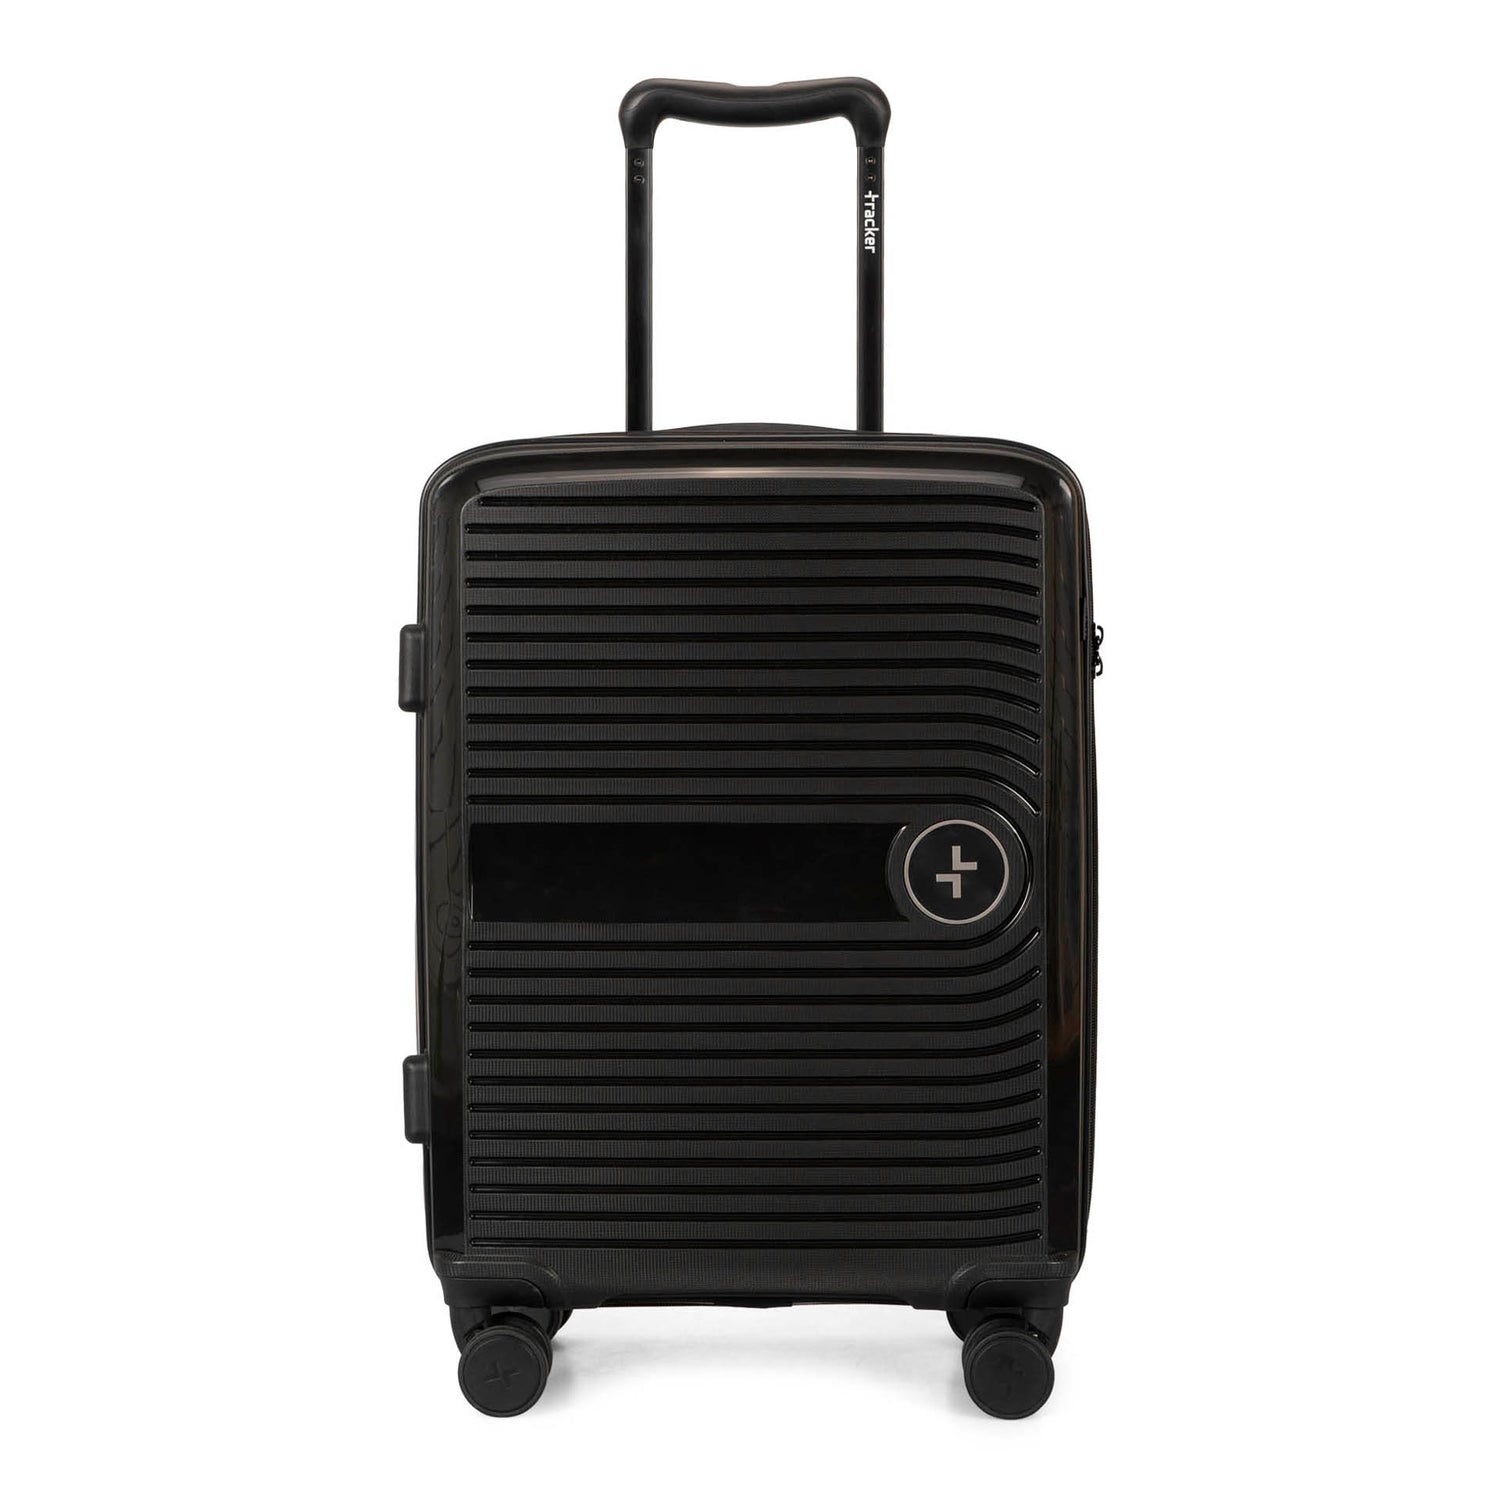 Front side of a black luggage called Dynamo designed by Tracker showing its telescopic handle, lined-pattern shell, and tracker symbol embossed on the front.